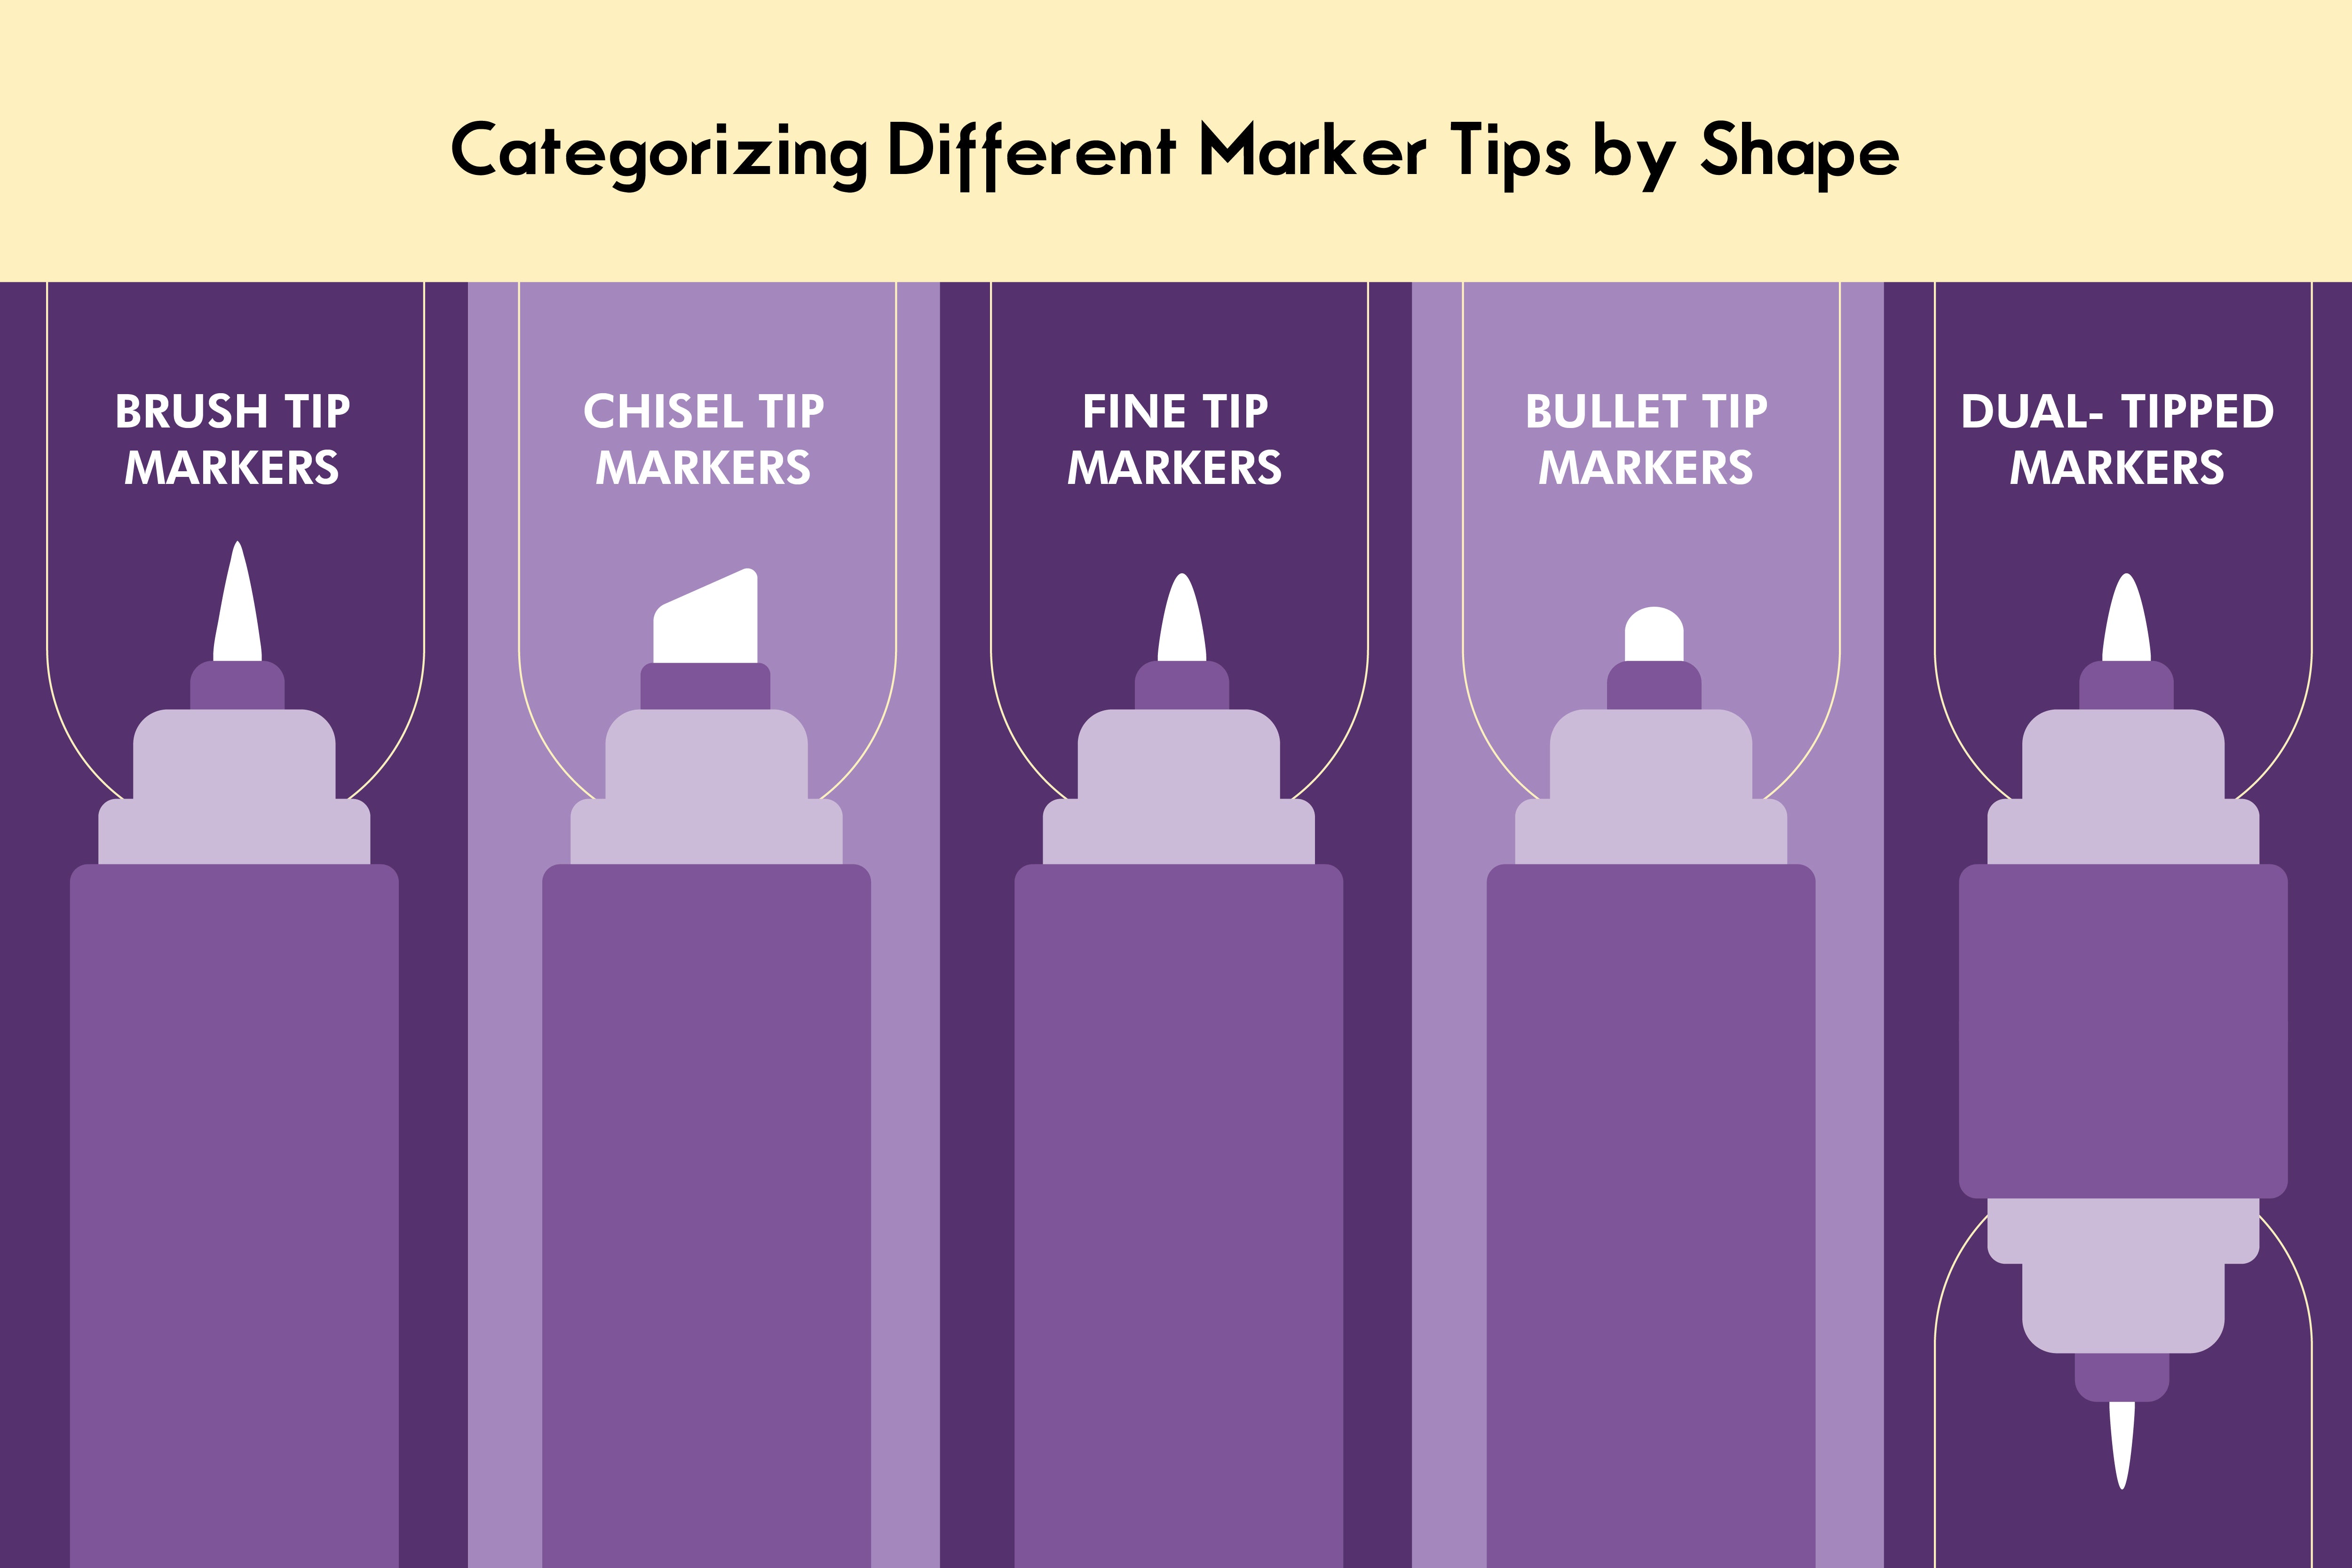 A graphic illustration showing the different marker tips according to their shapes